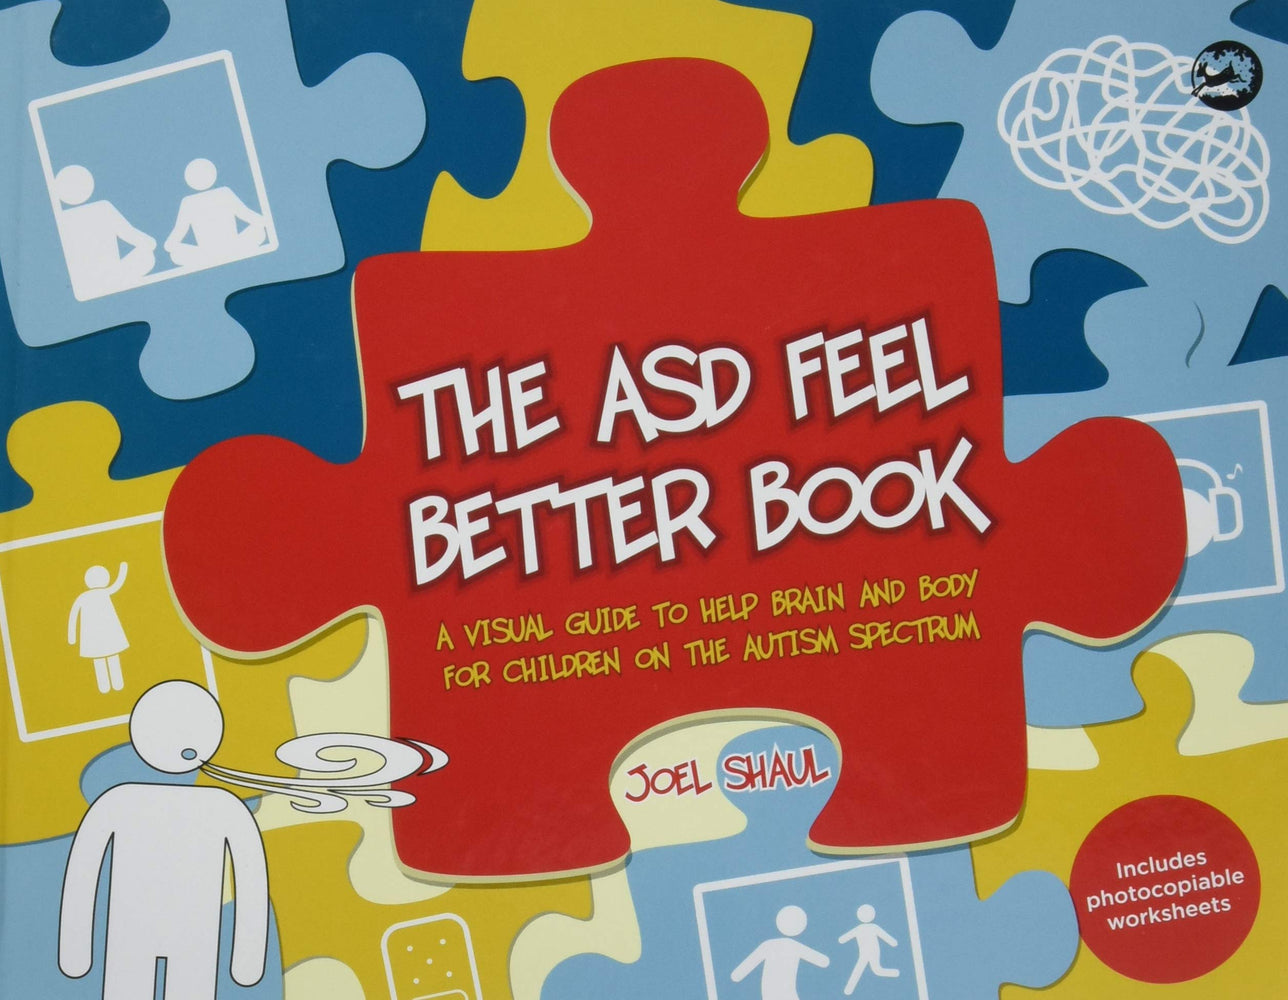 The ASD Feel Better Book: A Visual Guide to Help Brain and Body for Children on the Autism Spectrum